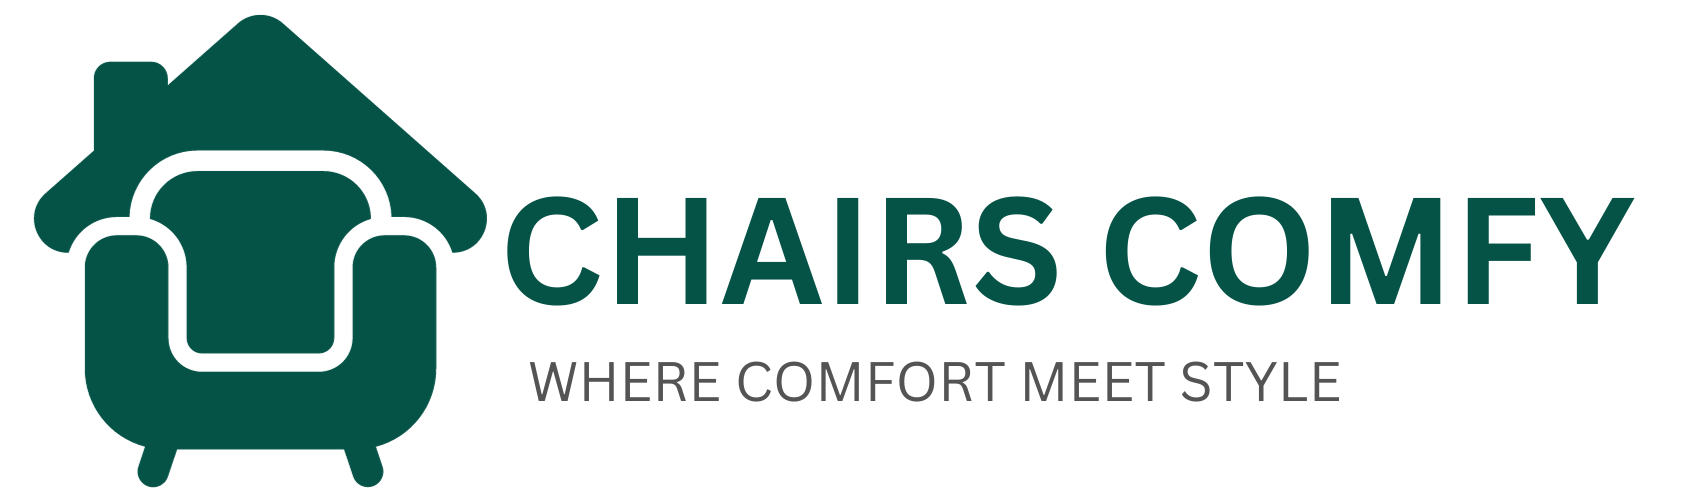 CHAIRS COMFY LOGO GREEN